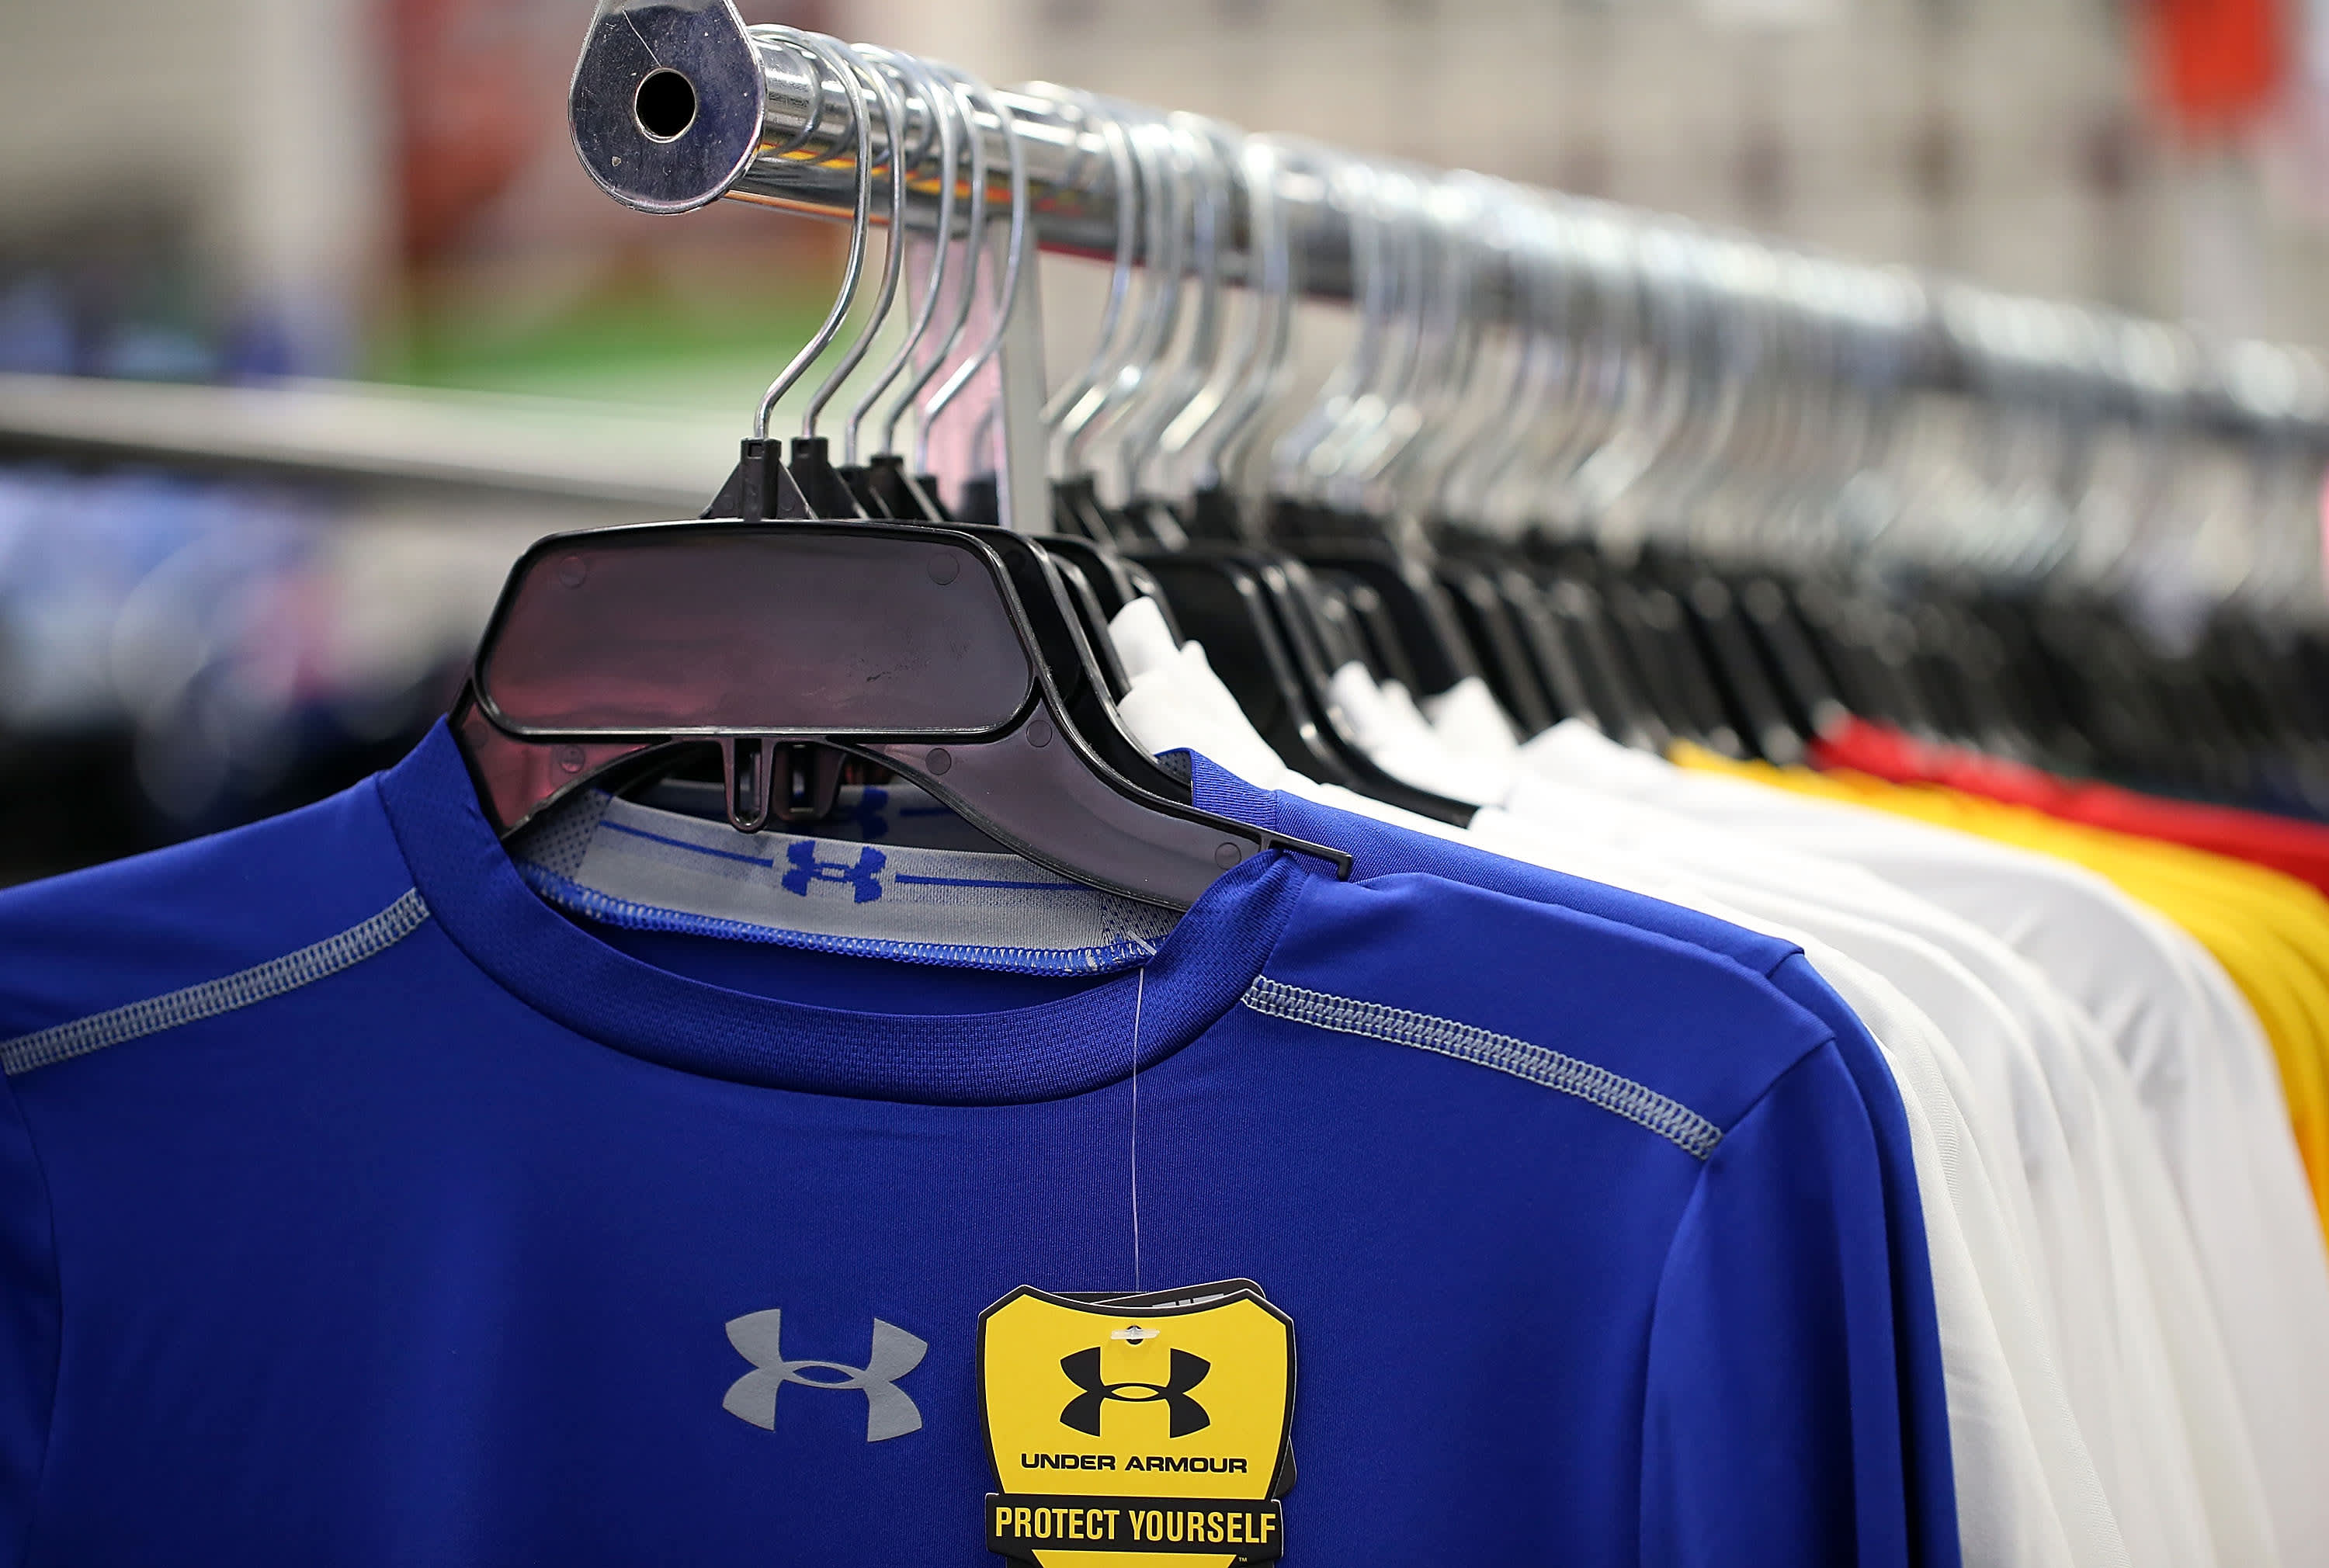 kohl's under armour shirts